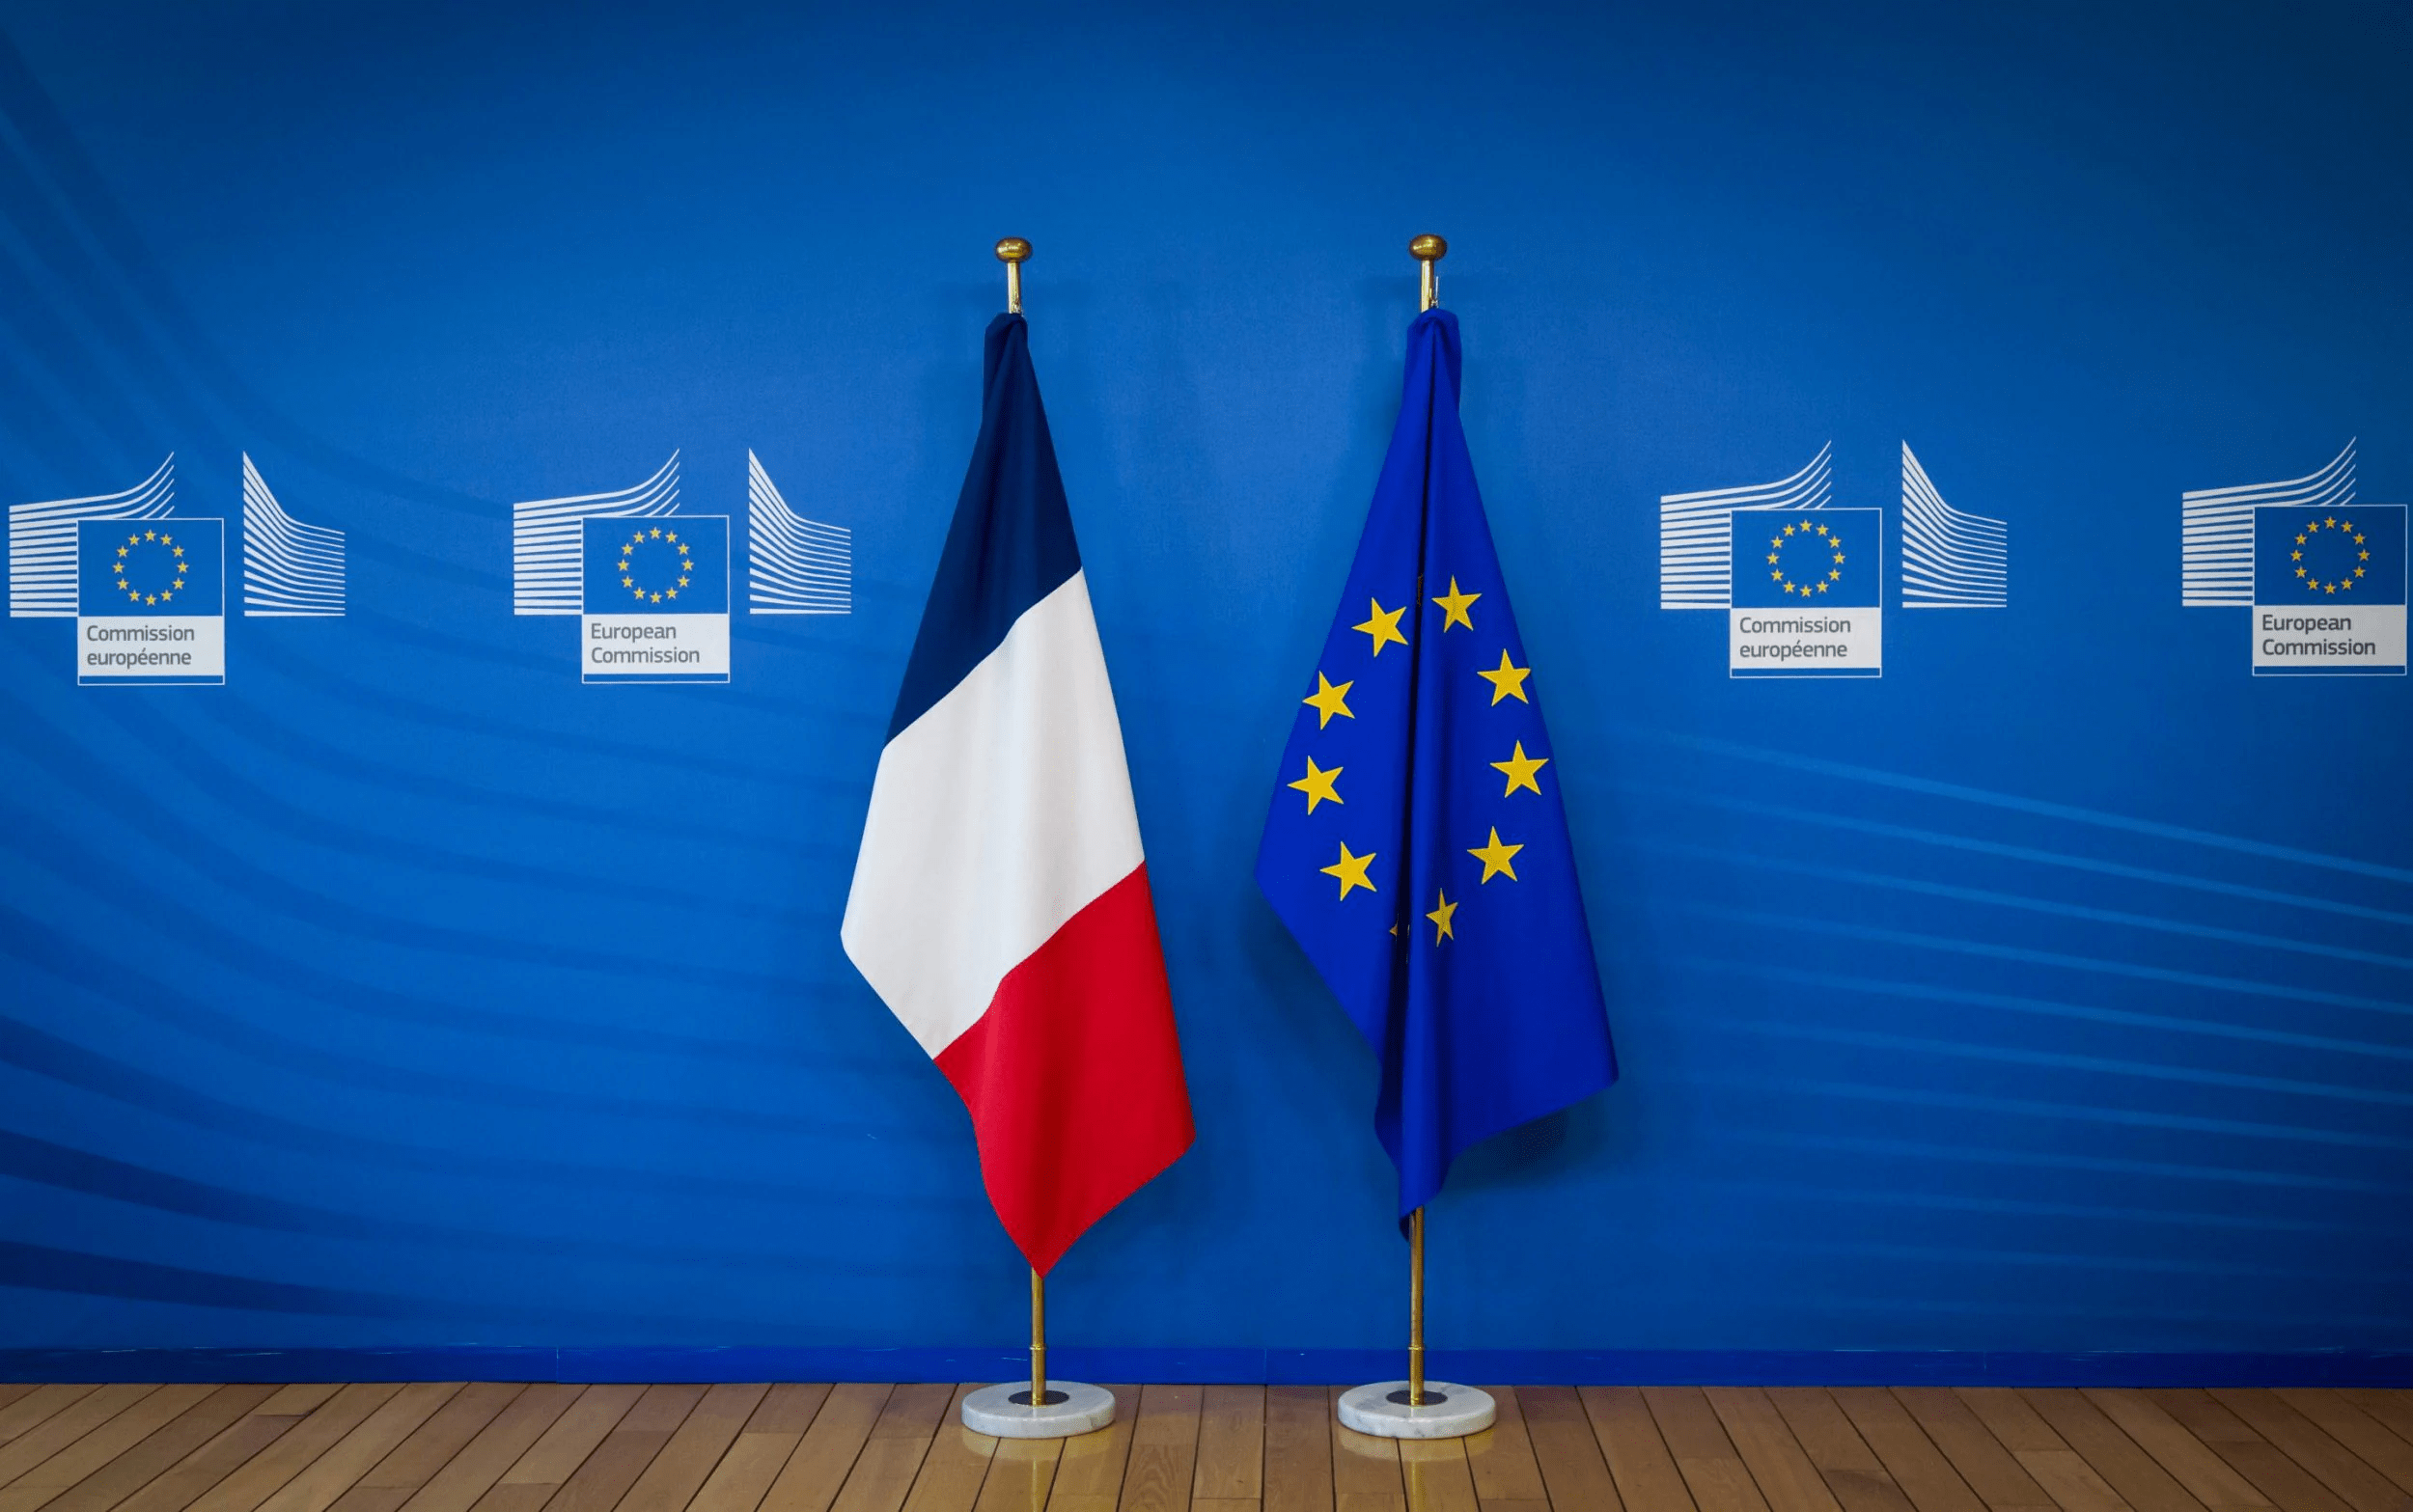 The French Flag and the European Flag. Source: European commission